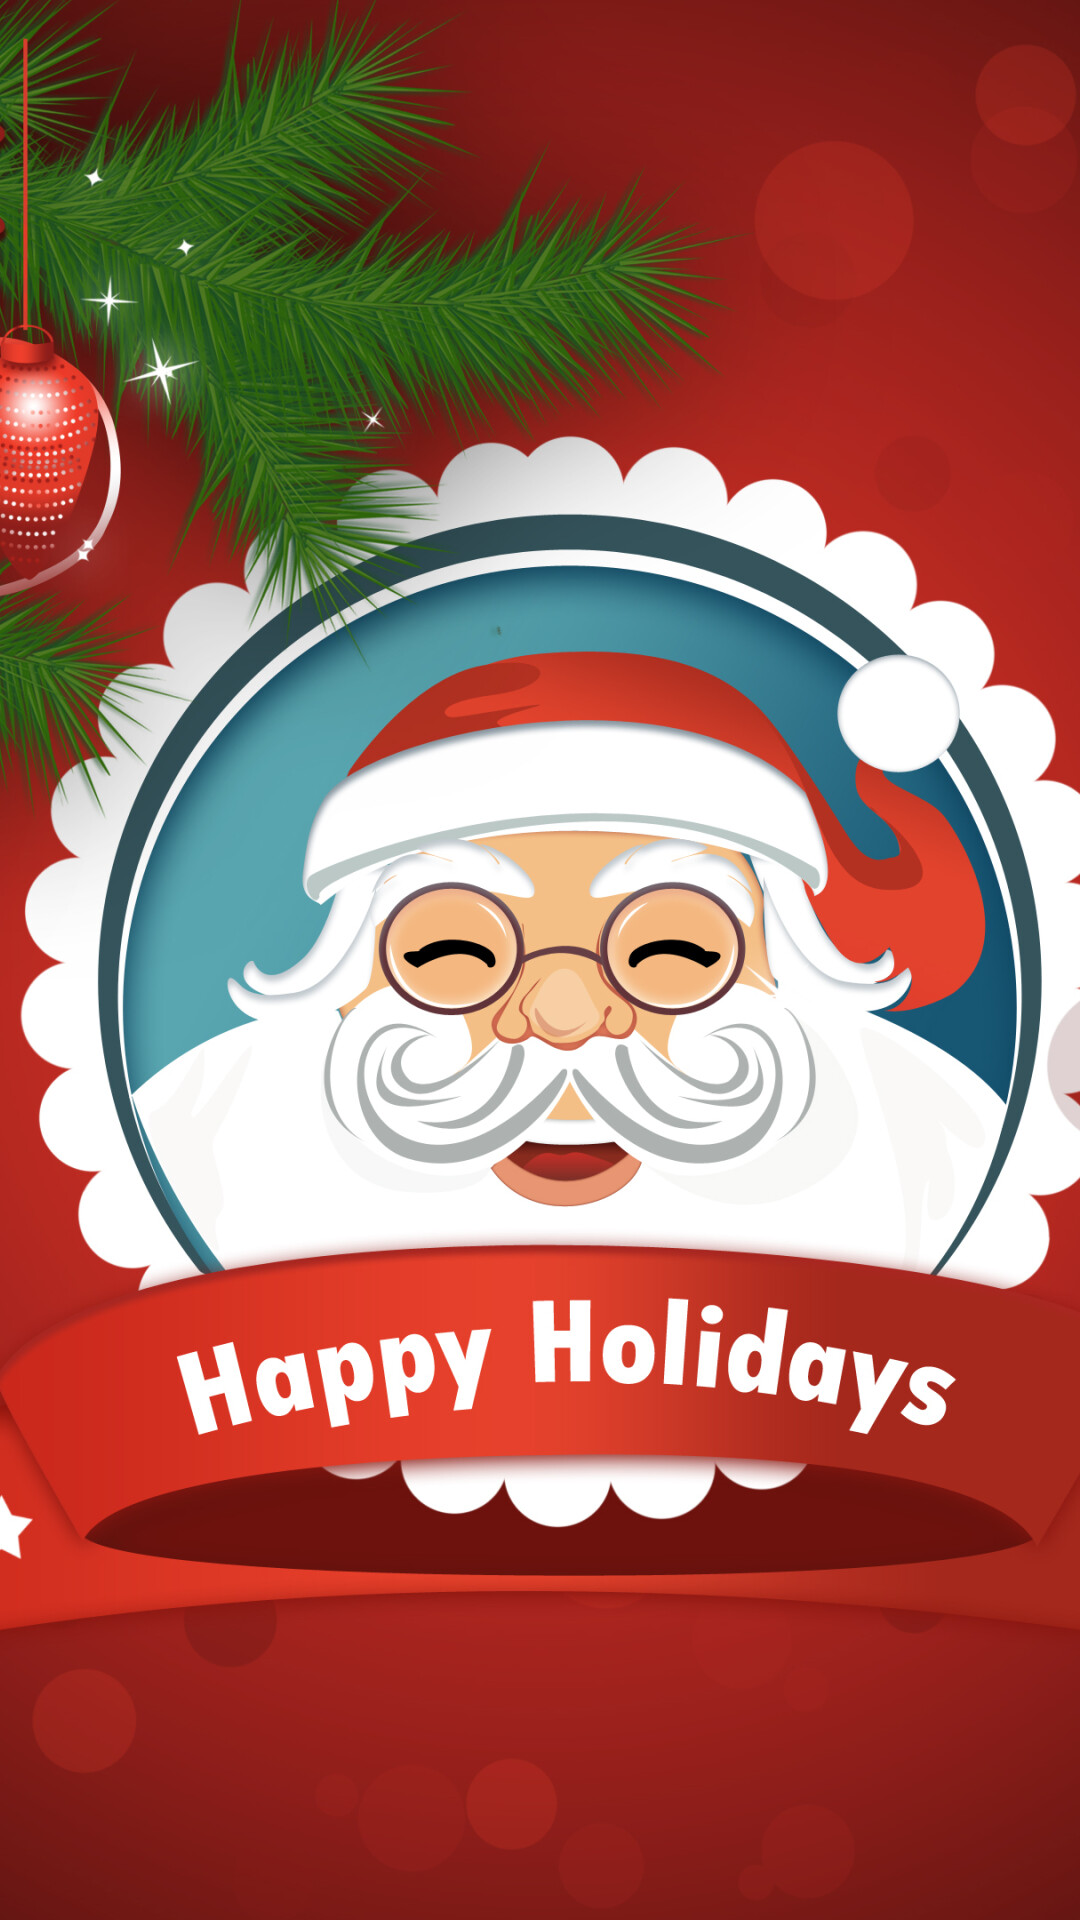 Santa Claus: Happy Holidays, The traditional patron of Christmas in the United States. 1080x1920 Full HD Background.